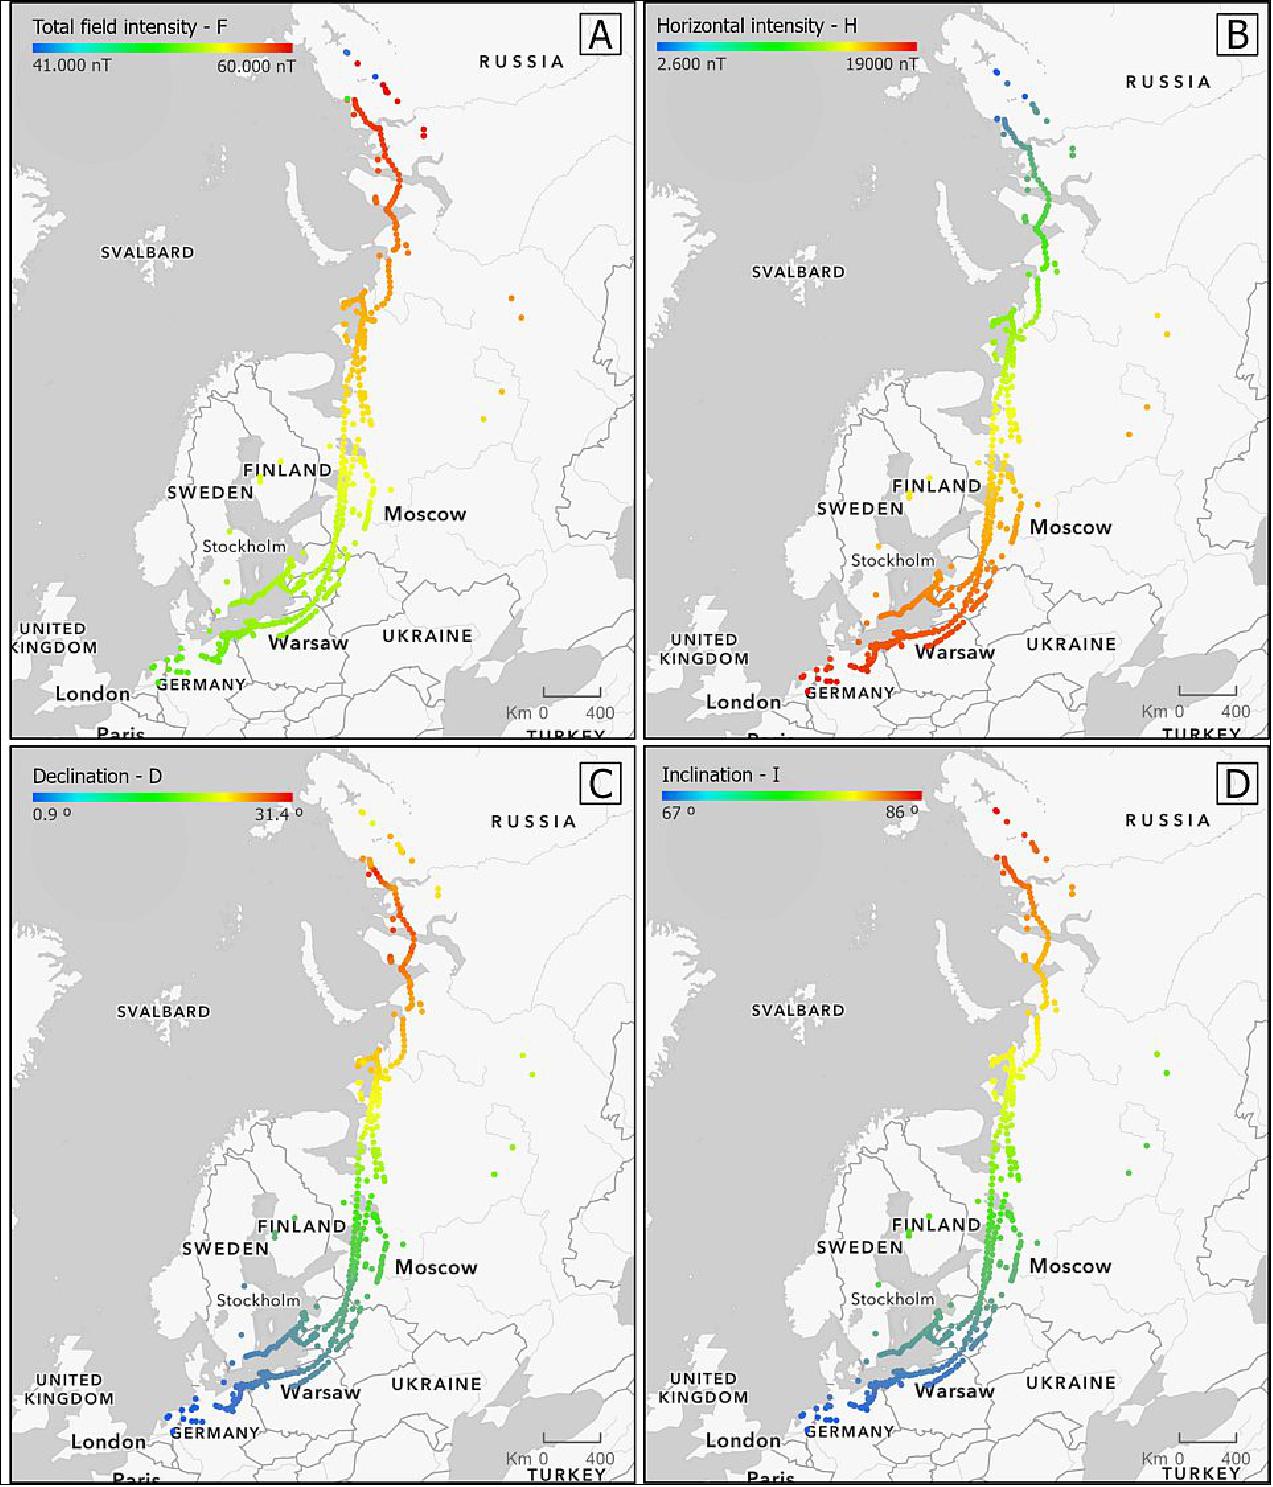 Figure 48: Geomagnetic intensity along migratory paths of white-fronted geese. The image shows the values of geomagnetic intensity that the geese encountered on their journeys. These maps show real values that the geese encountered on their migration from Siberia to Germany (image credit: Urška Demšar, University of St Andrews)